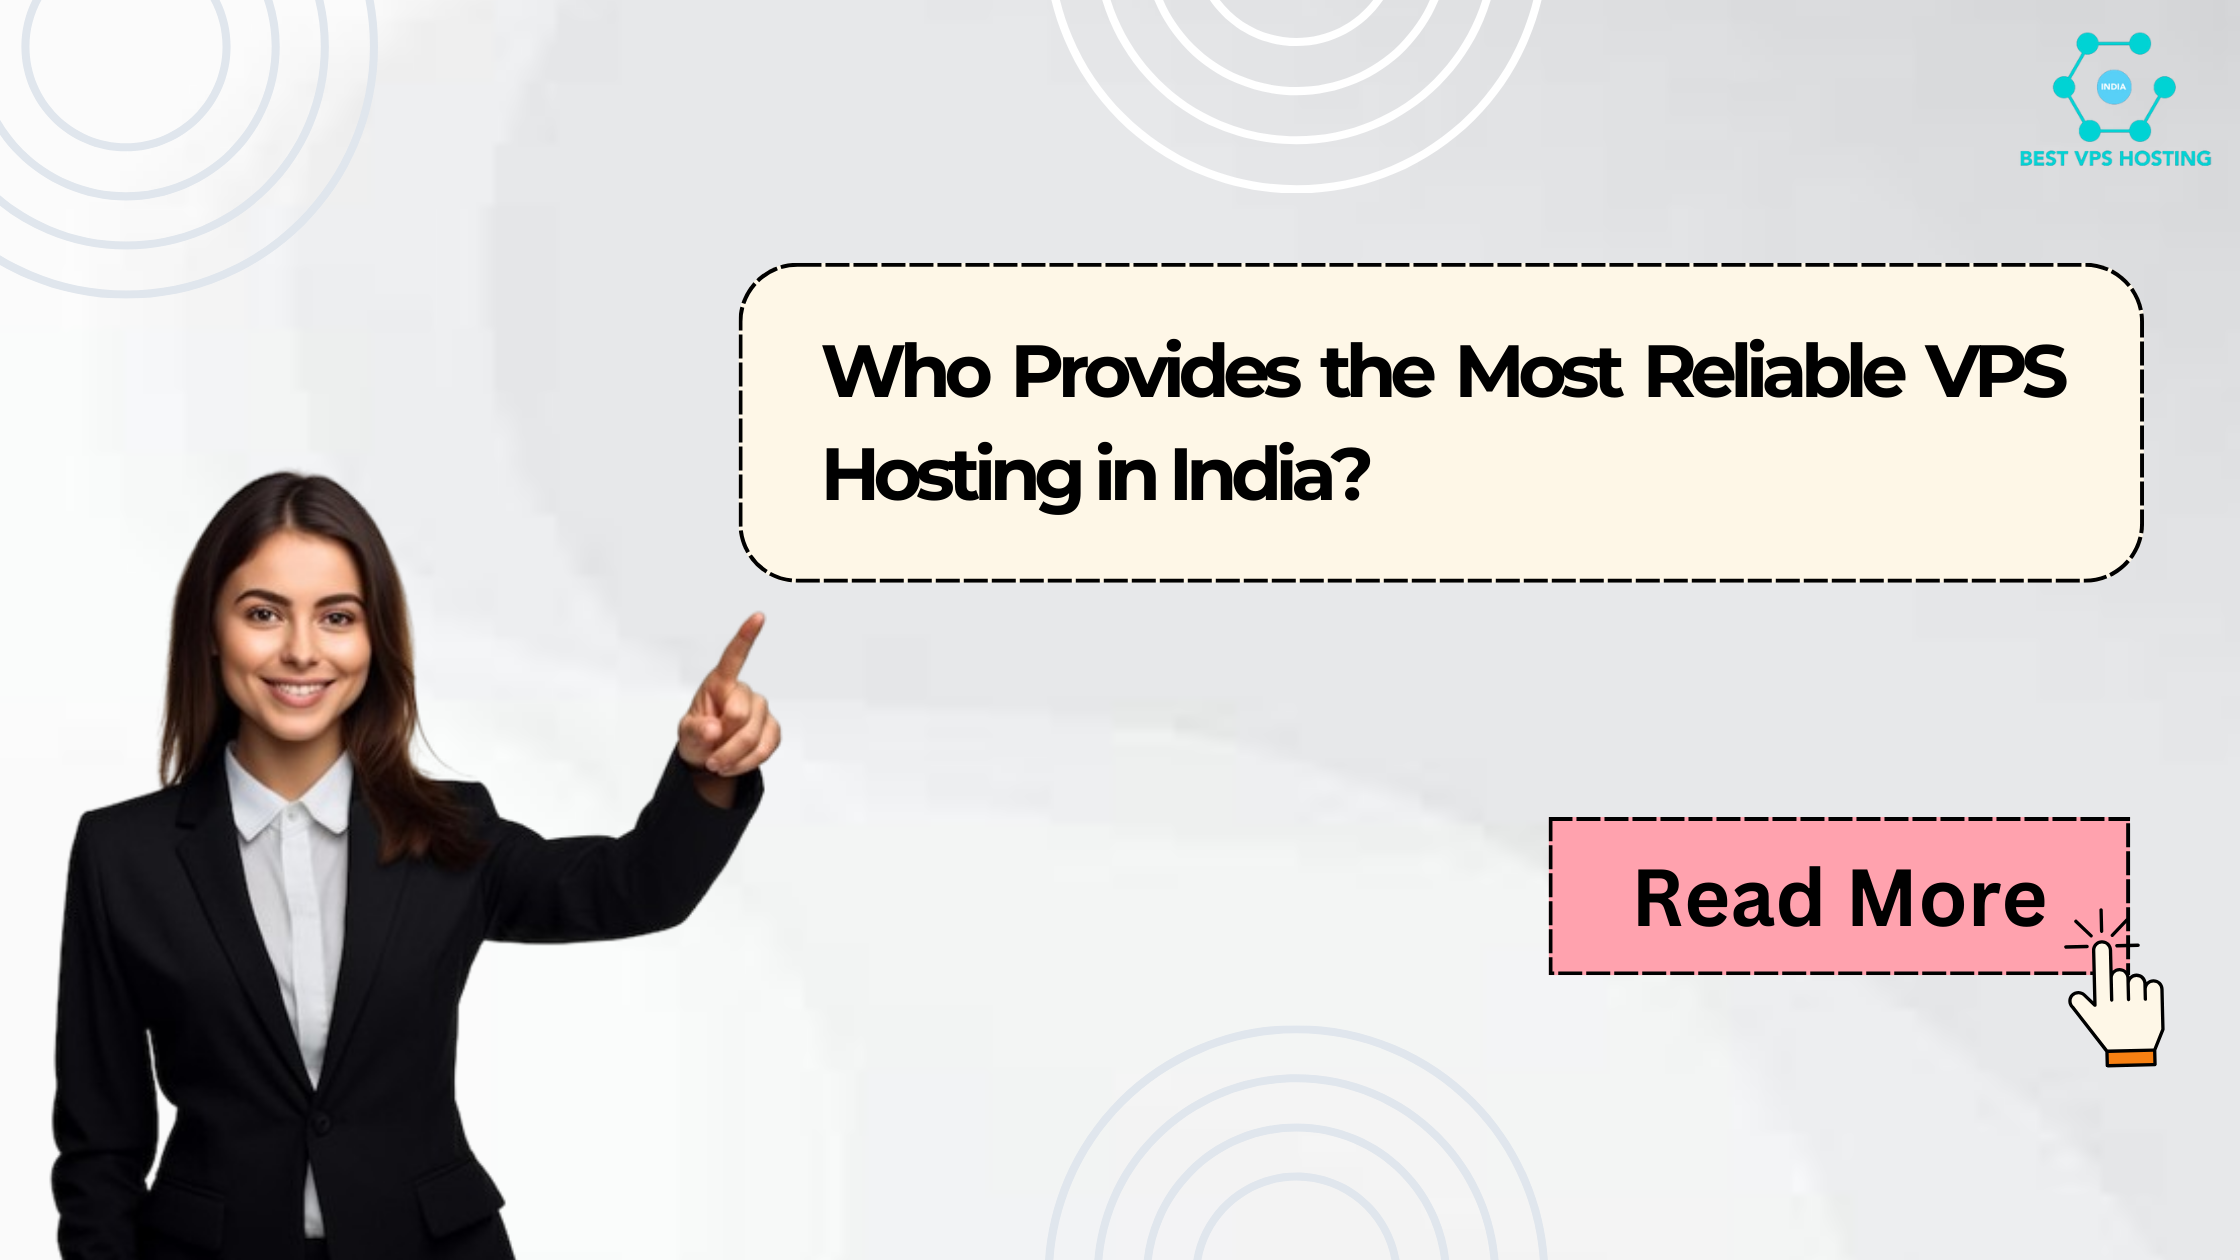 Who Provides the Most Reliable VPS Hosting in India